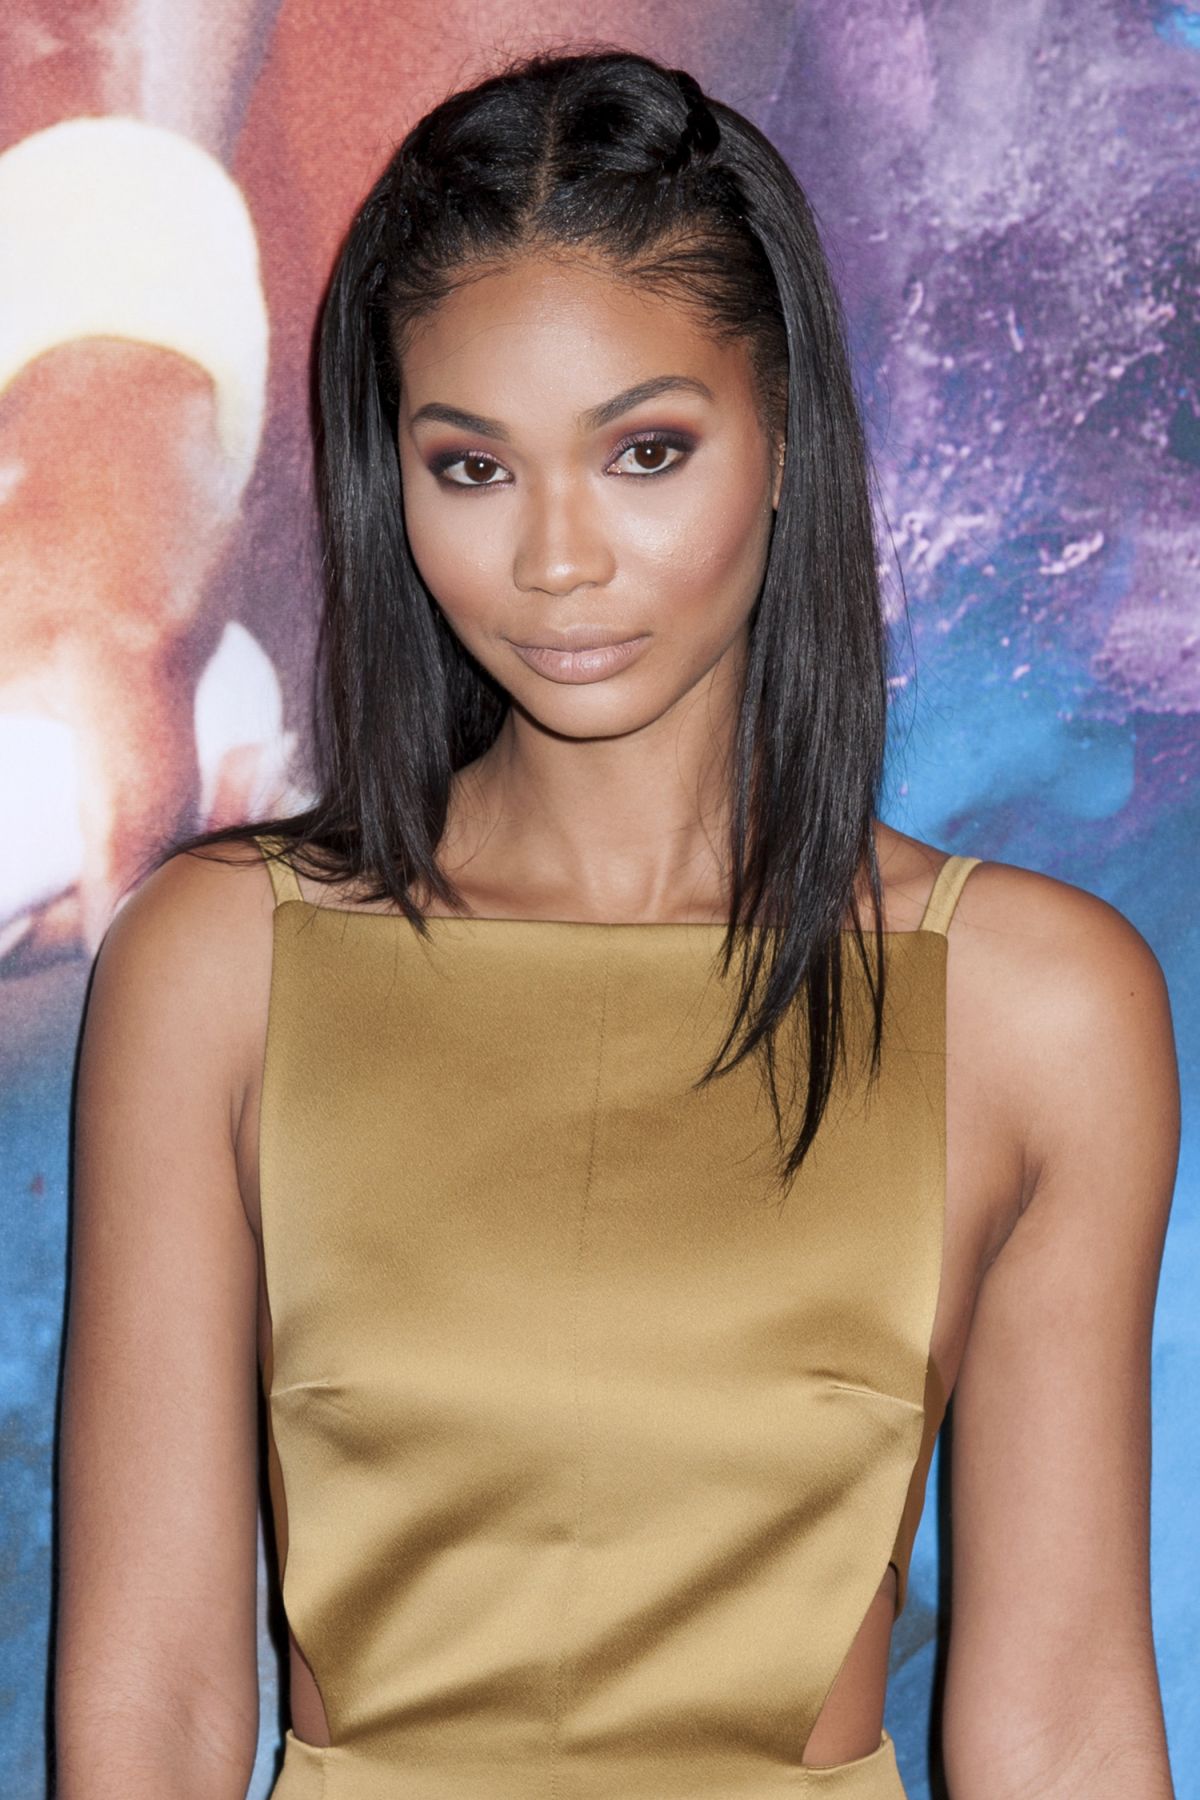 CHANEL IMAN at 2015 Sports Illustrated Sportsperson of the Year Awards ...